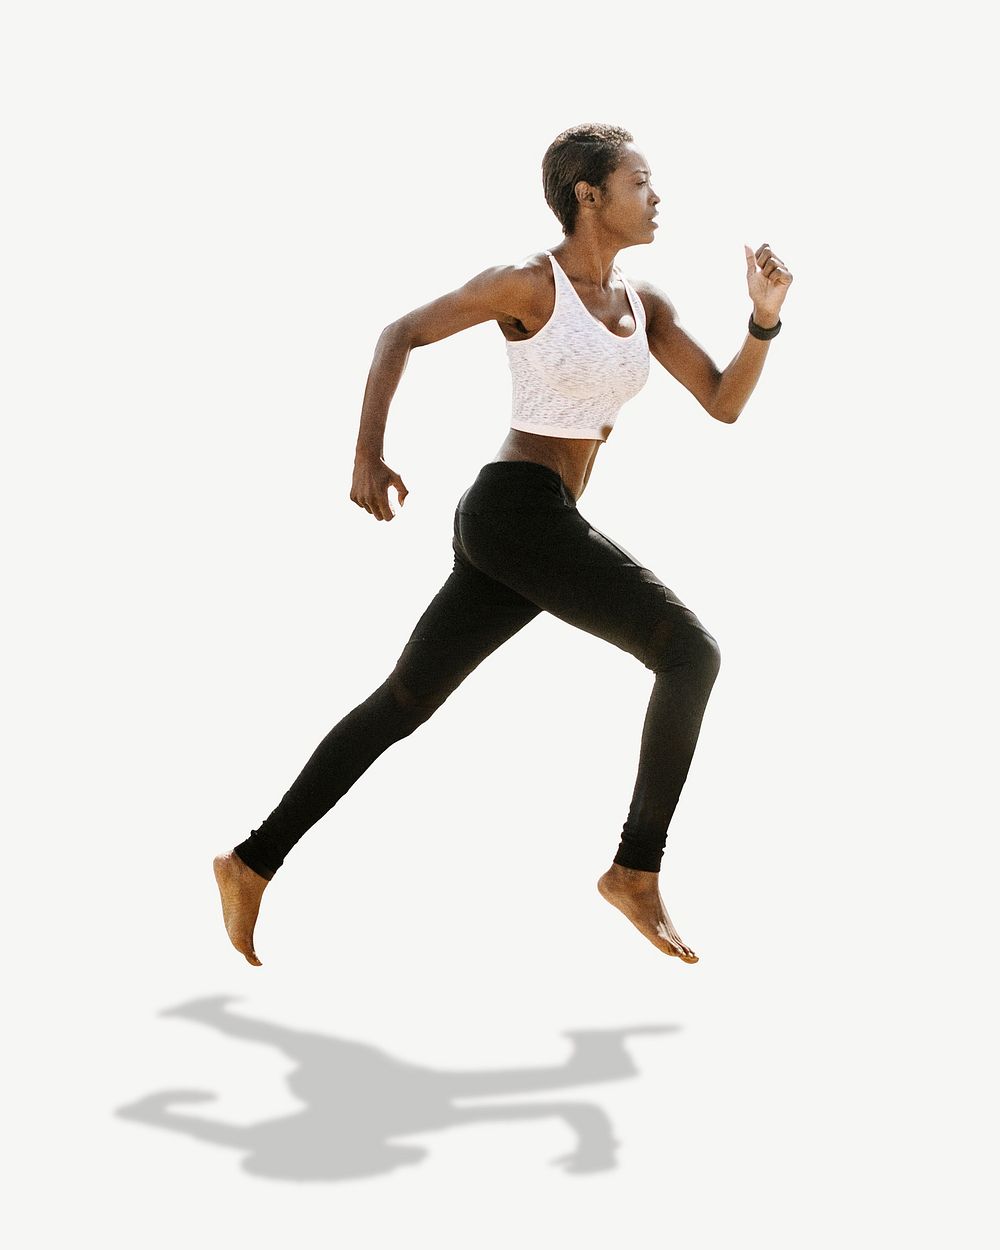 Black woman running collage element psd